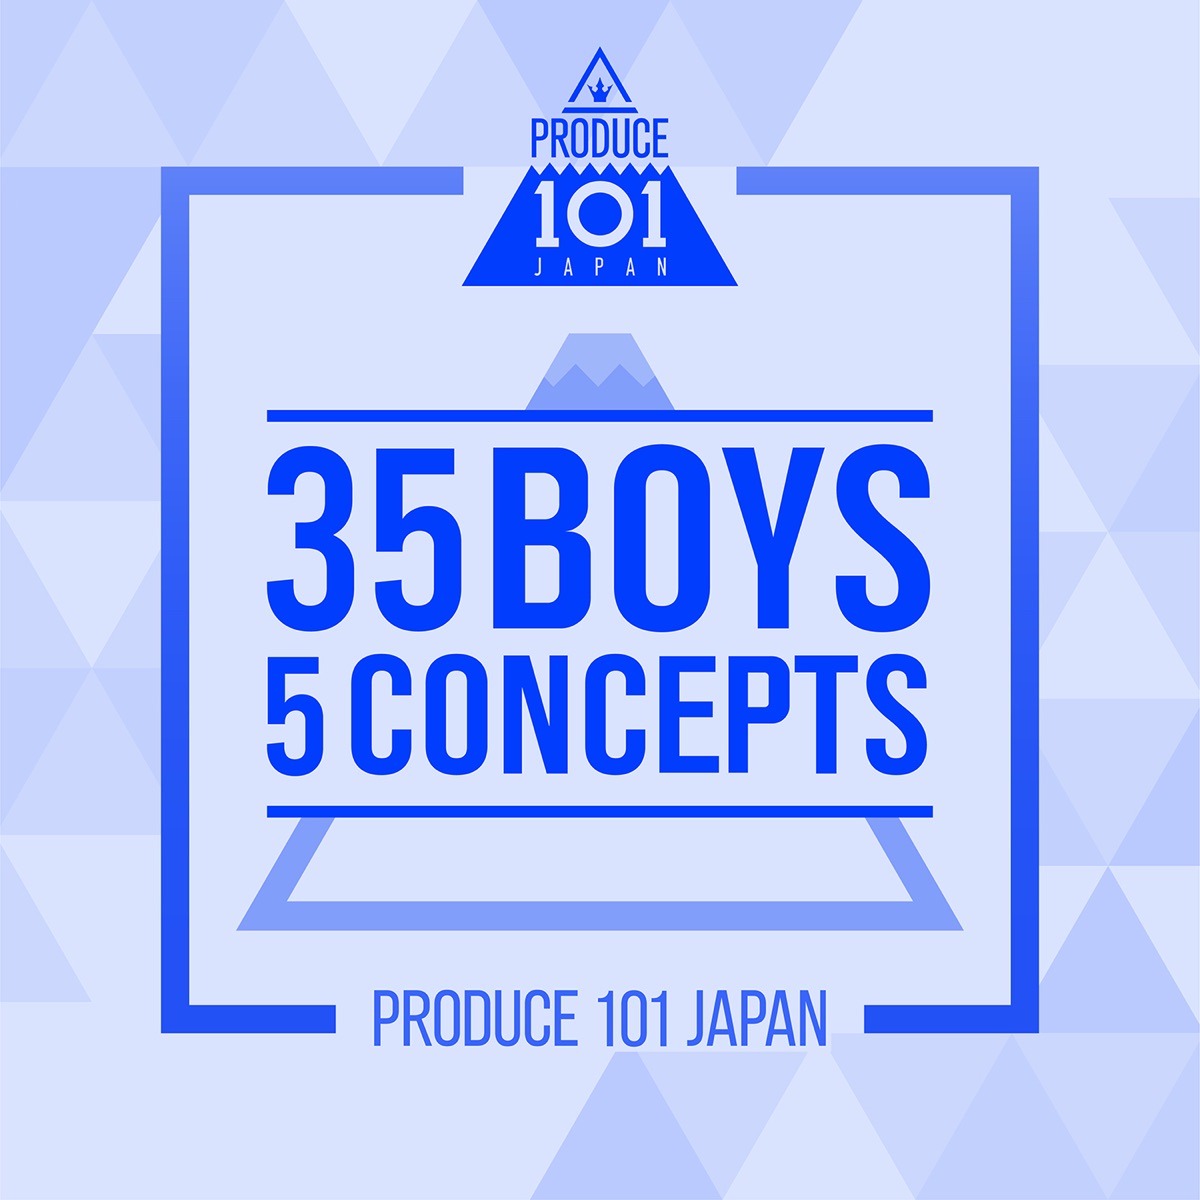 Cover art for『DoReMiFaSolLaSiDomino - DOMINO』from the release『PRODUCE 101 JAPAN - 35 Boys 5 Concepts